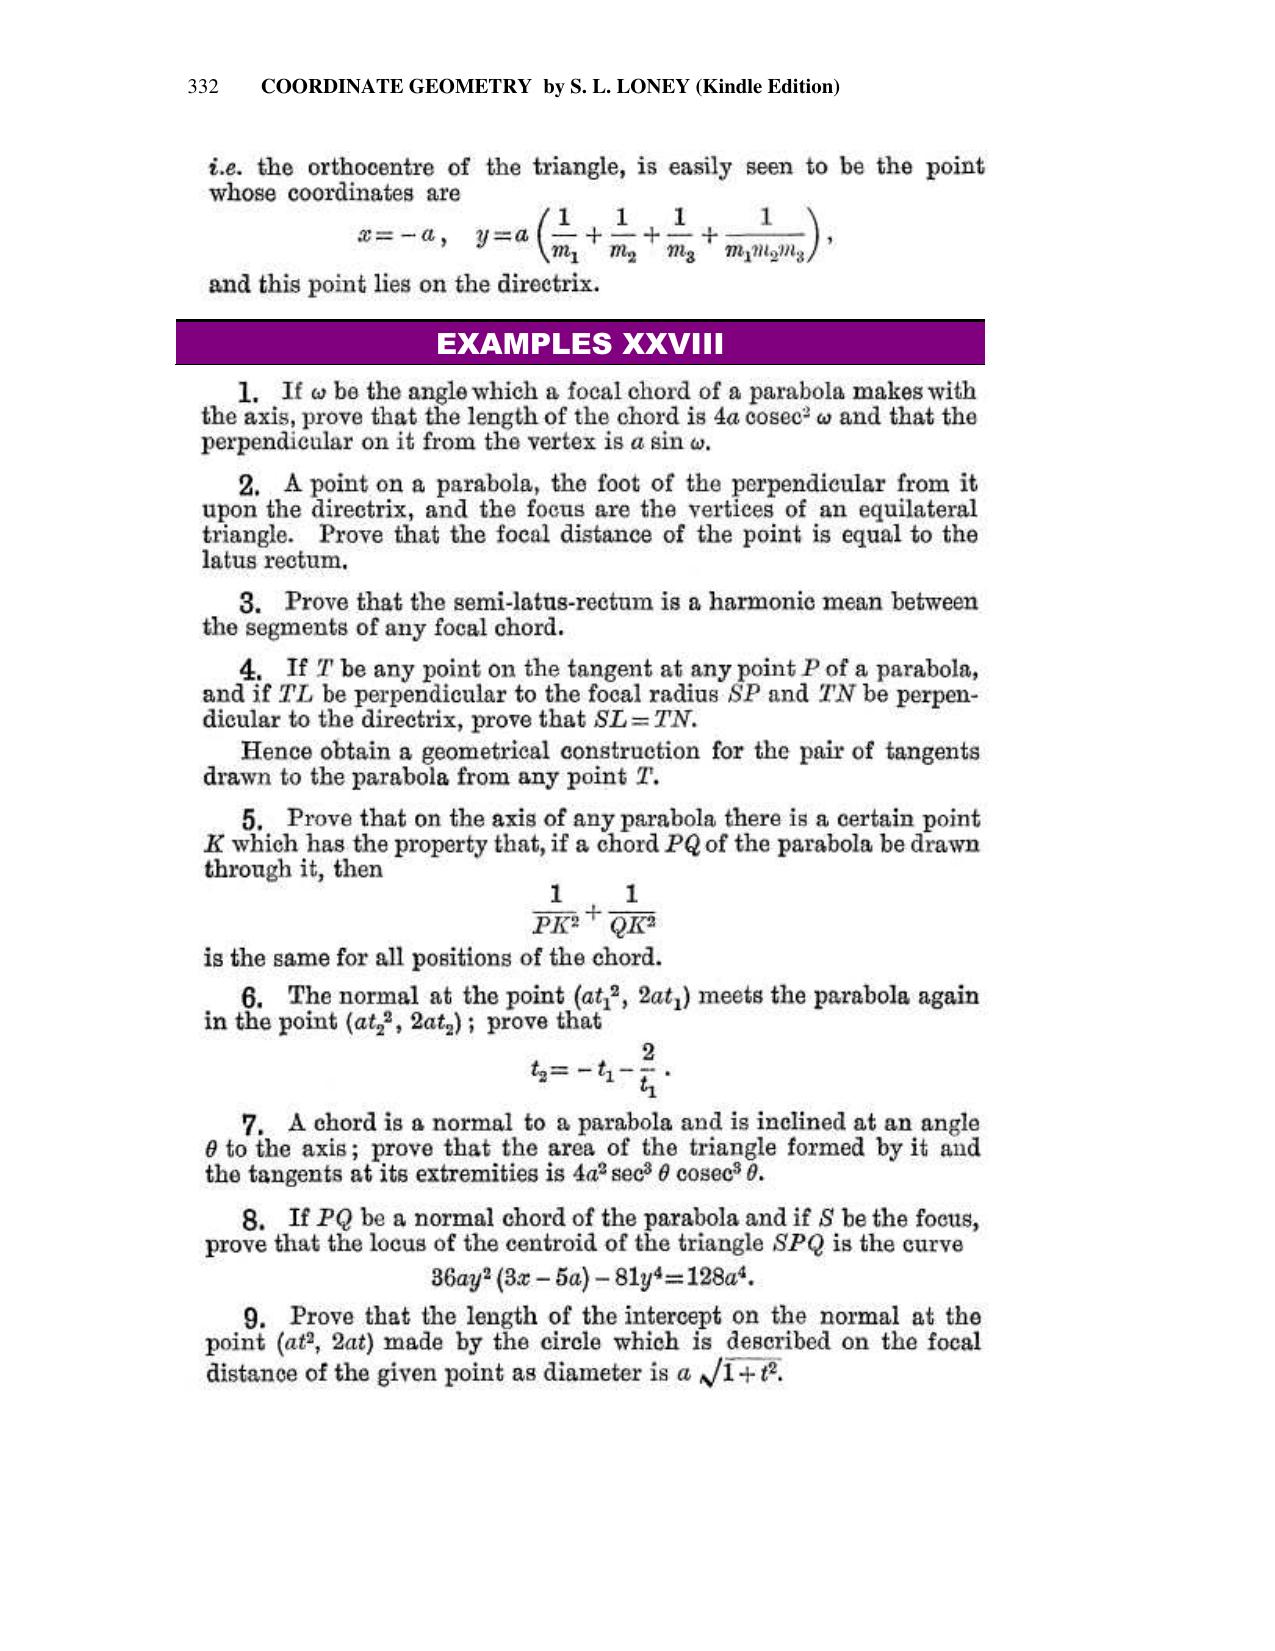 Chapter 10: The Parabola - SL Loney Solutions: The Elements of Coordinate Geometry - Page 46